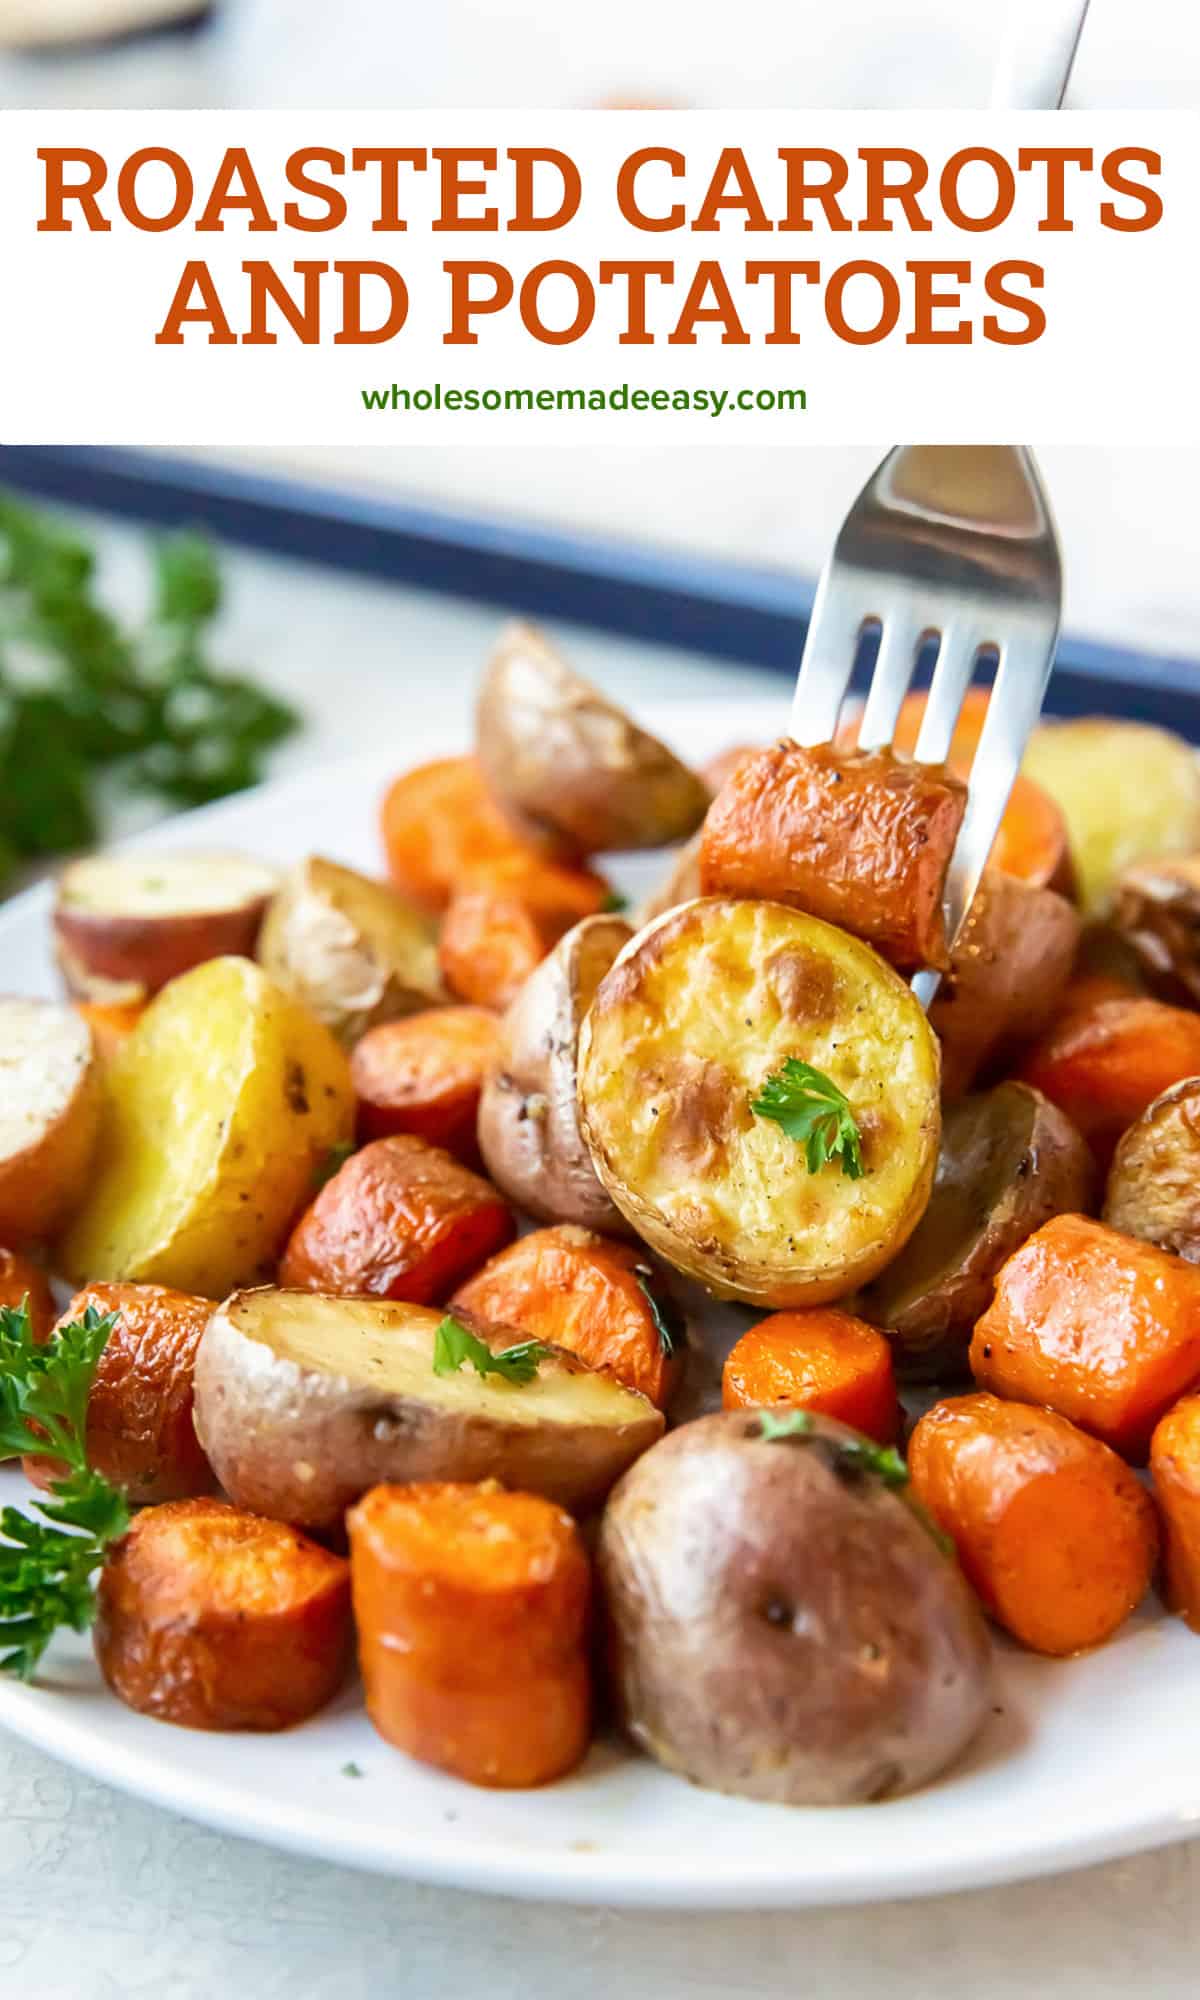 A fork piercing a potato and carrot on a plate filled with roasted vegetables with text.